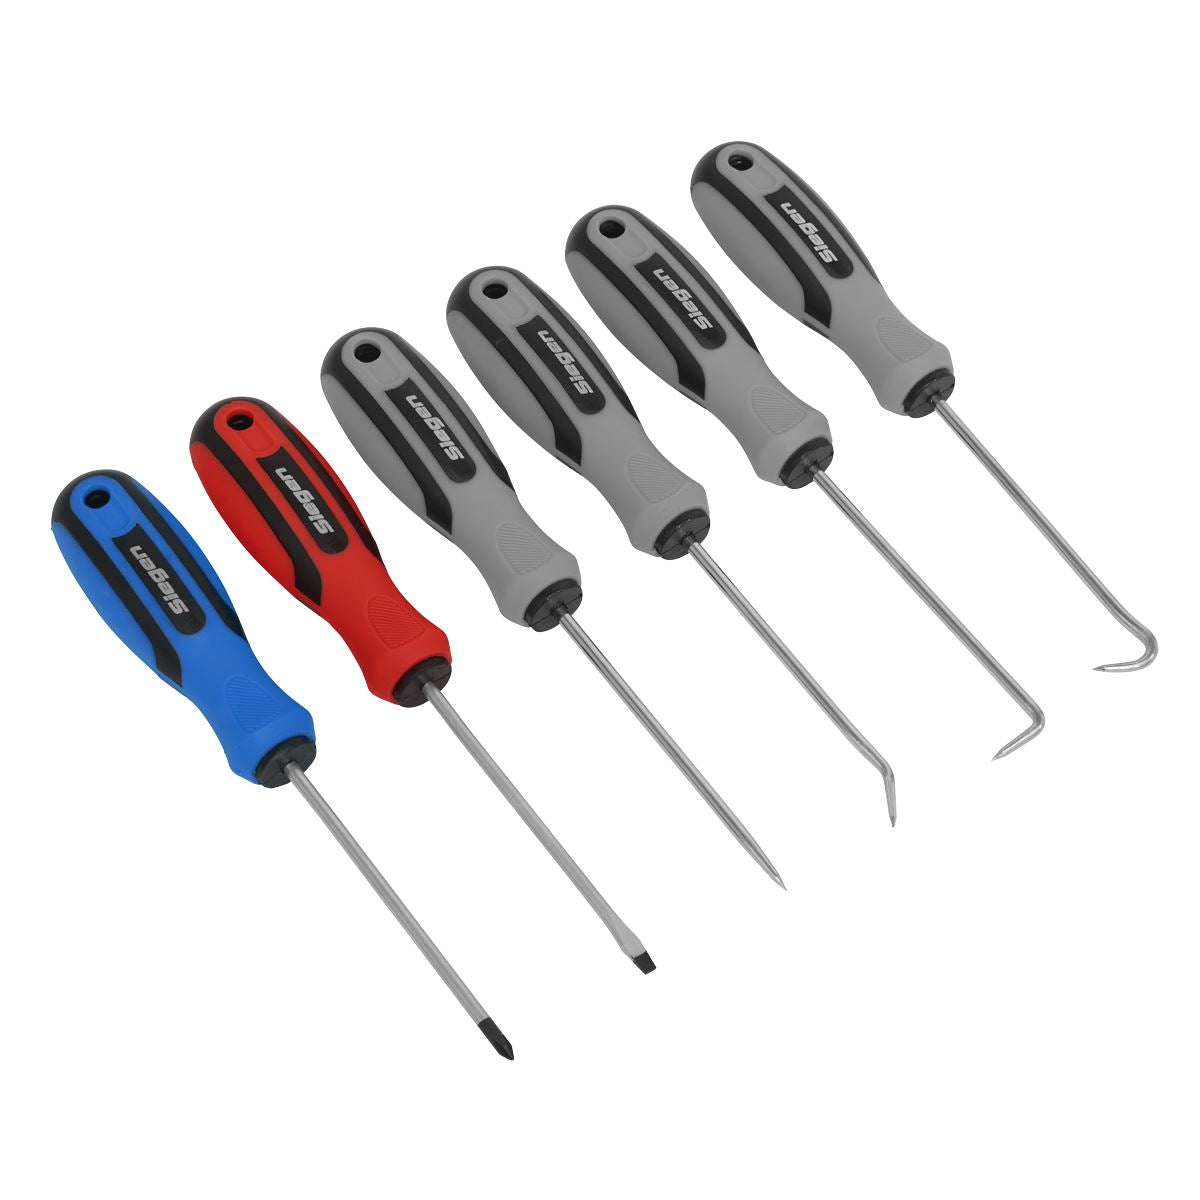 Siegen 6 Piece Mini Pick and Screwdriver Set Cotter Pin O-Ring Seal Remover